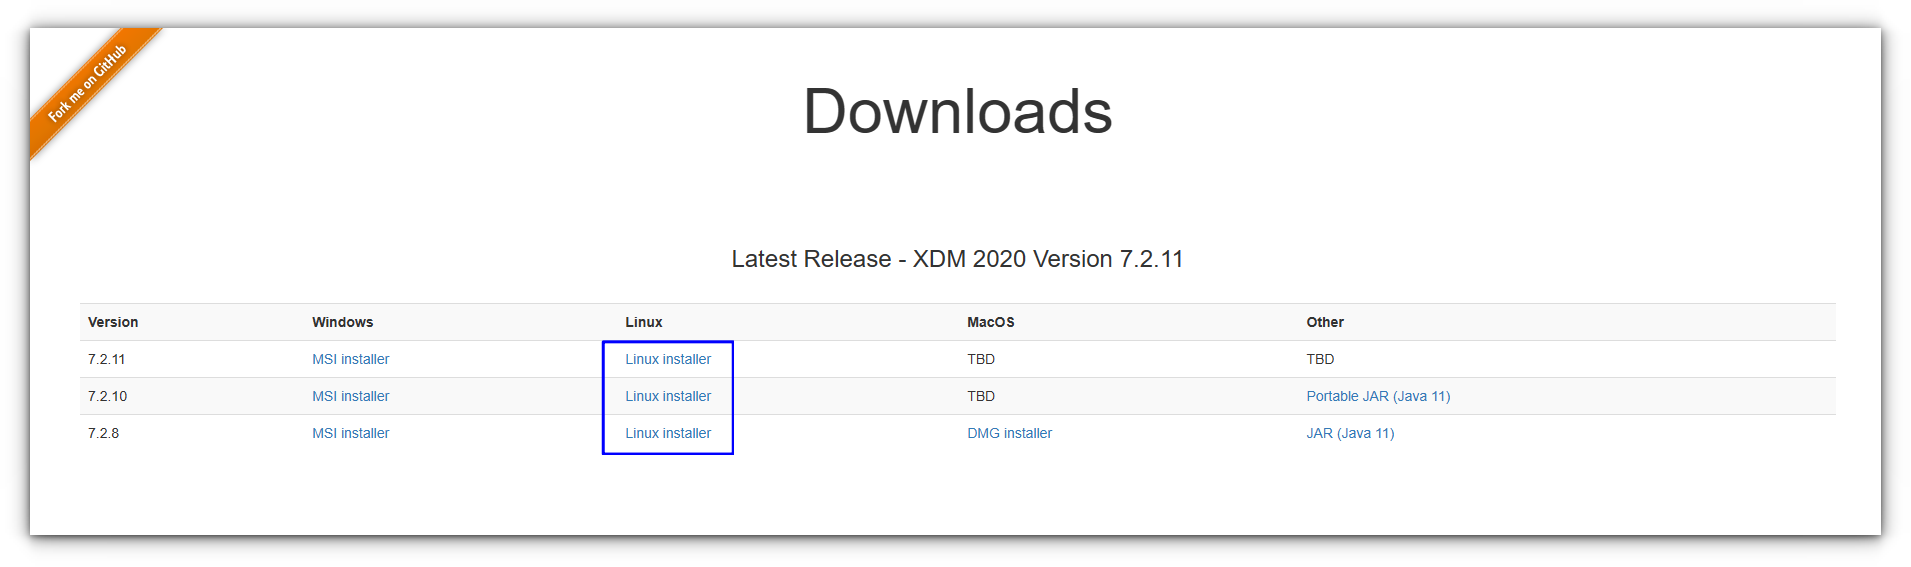 Xtreme Download Manager official download page